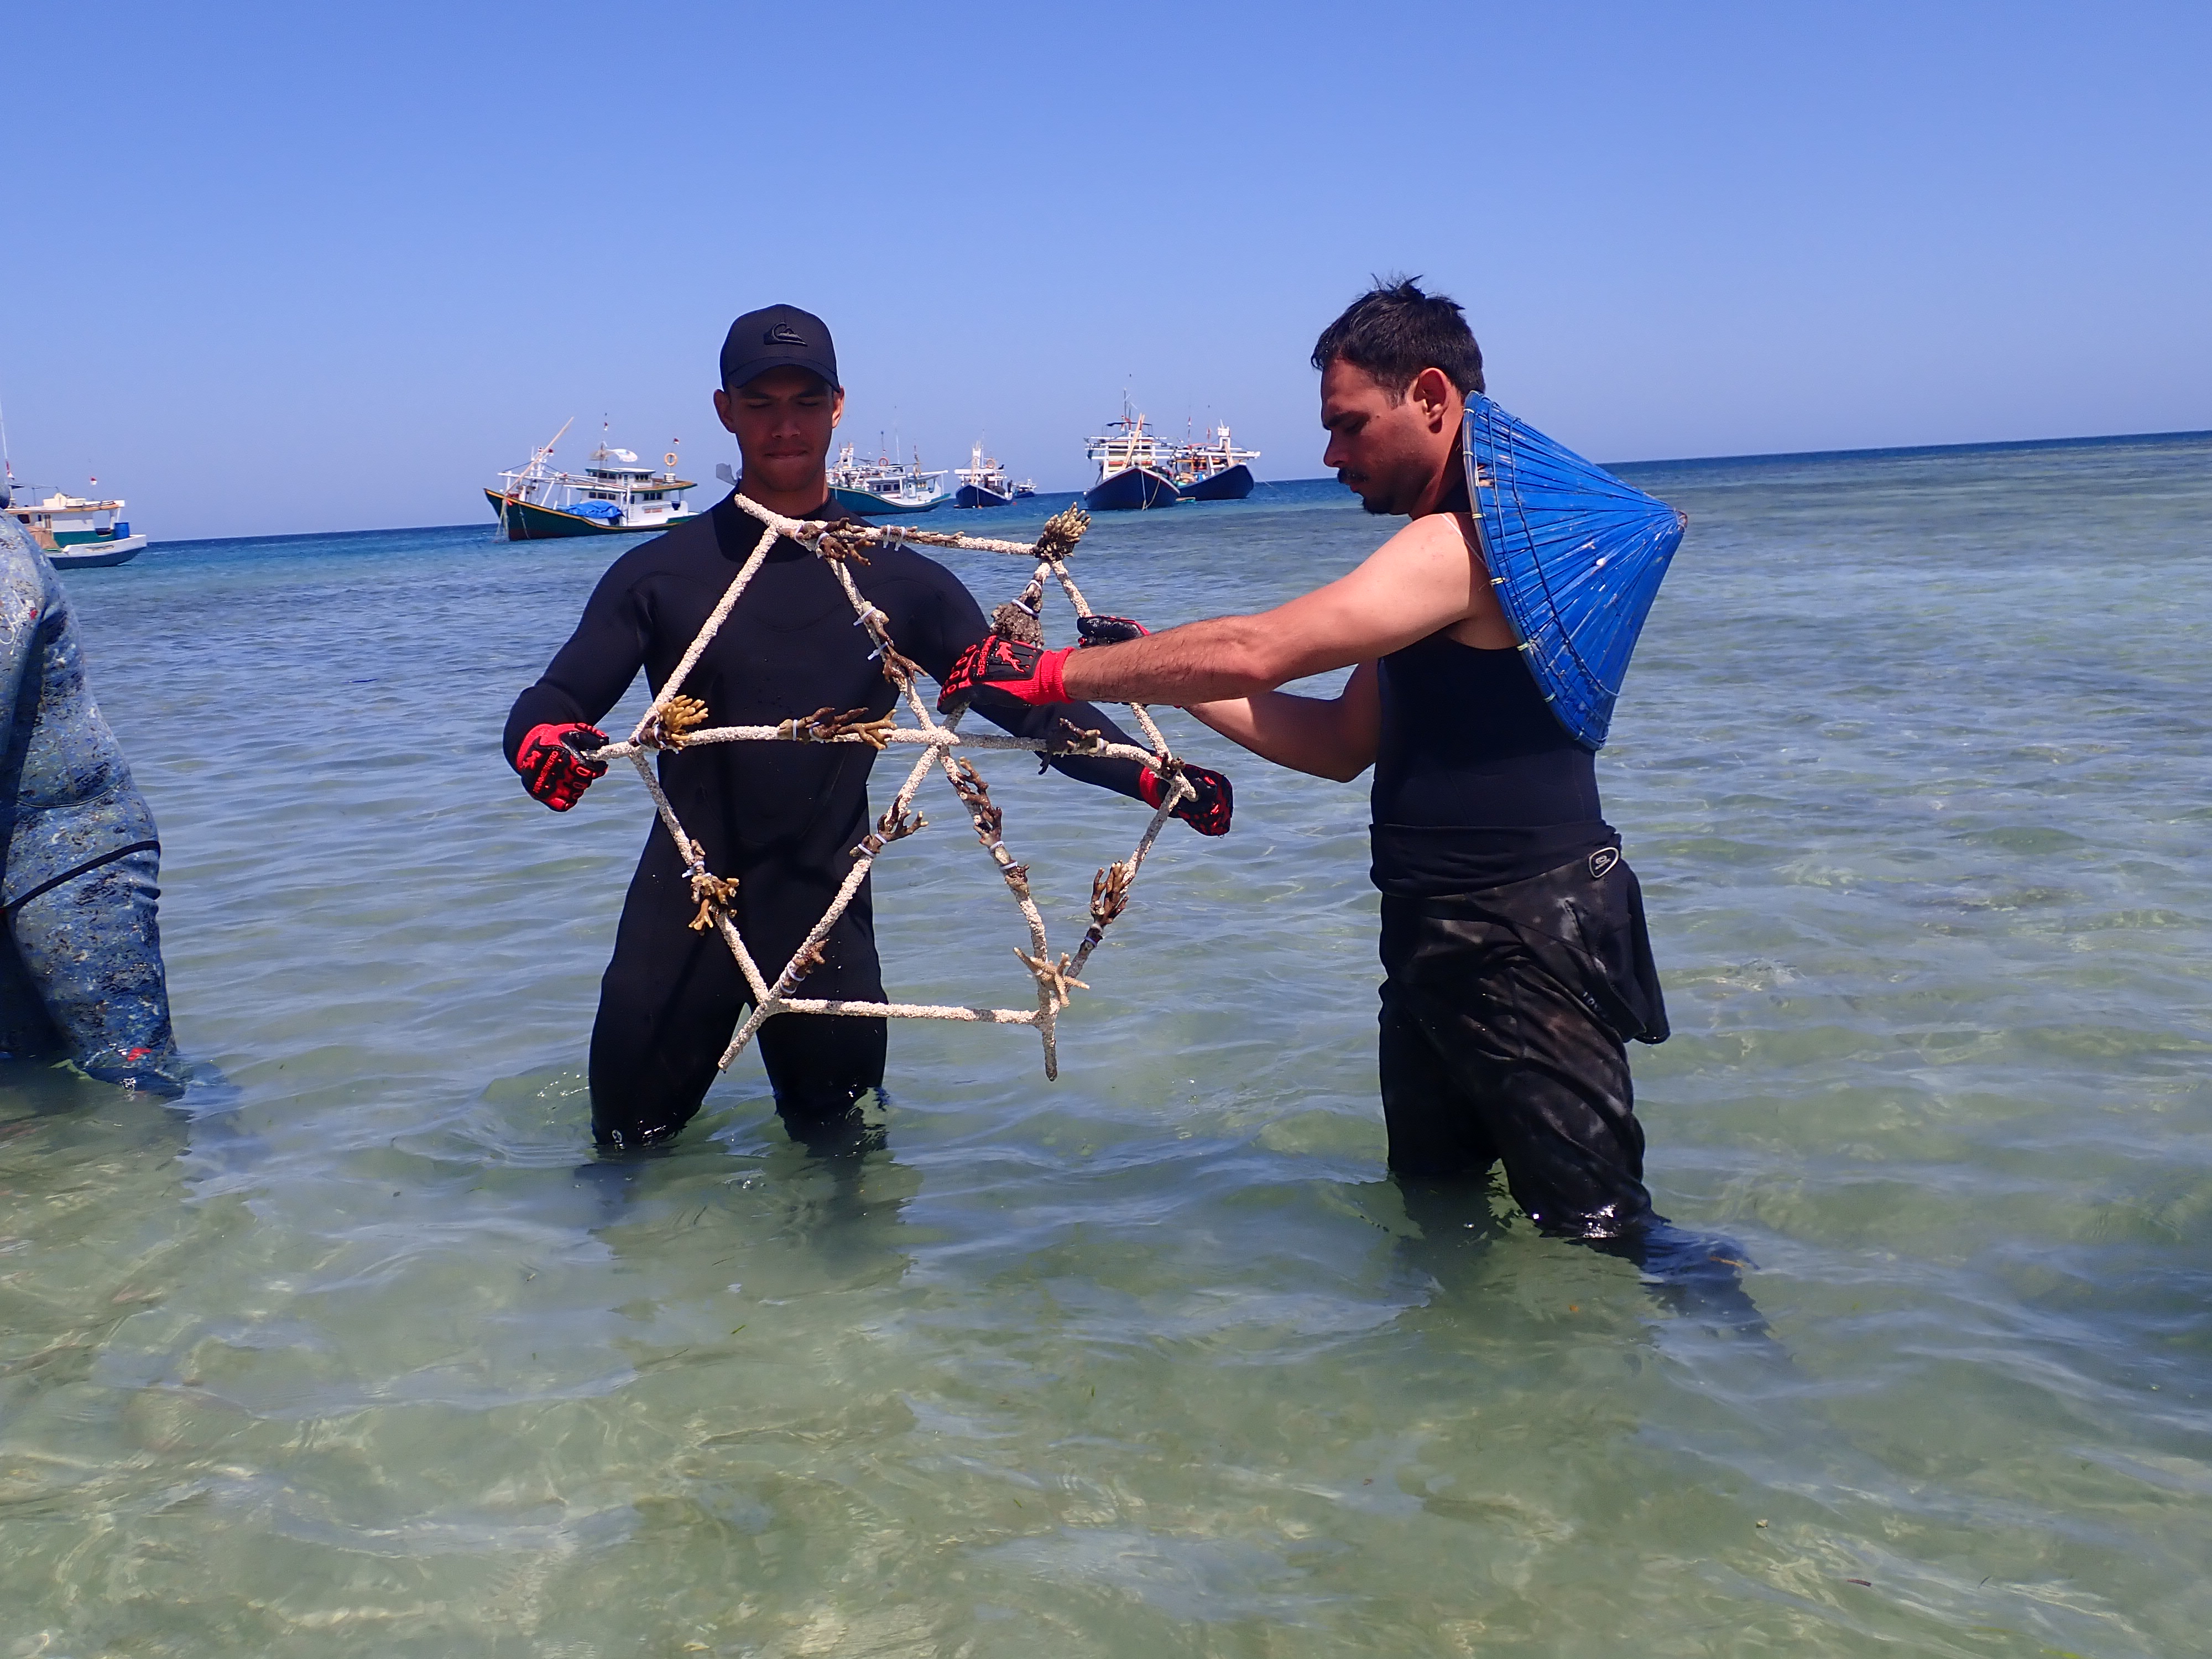 Two rangers in wetsuits in shallow water handing metal structure with small segments of coral attached